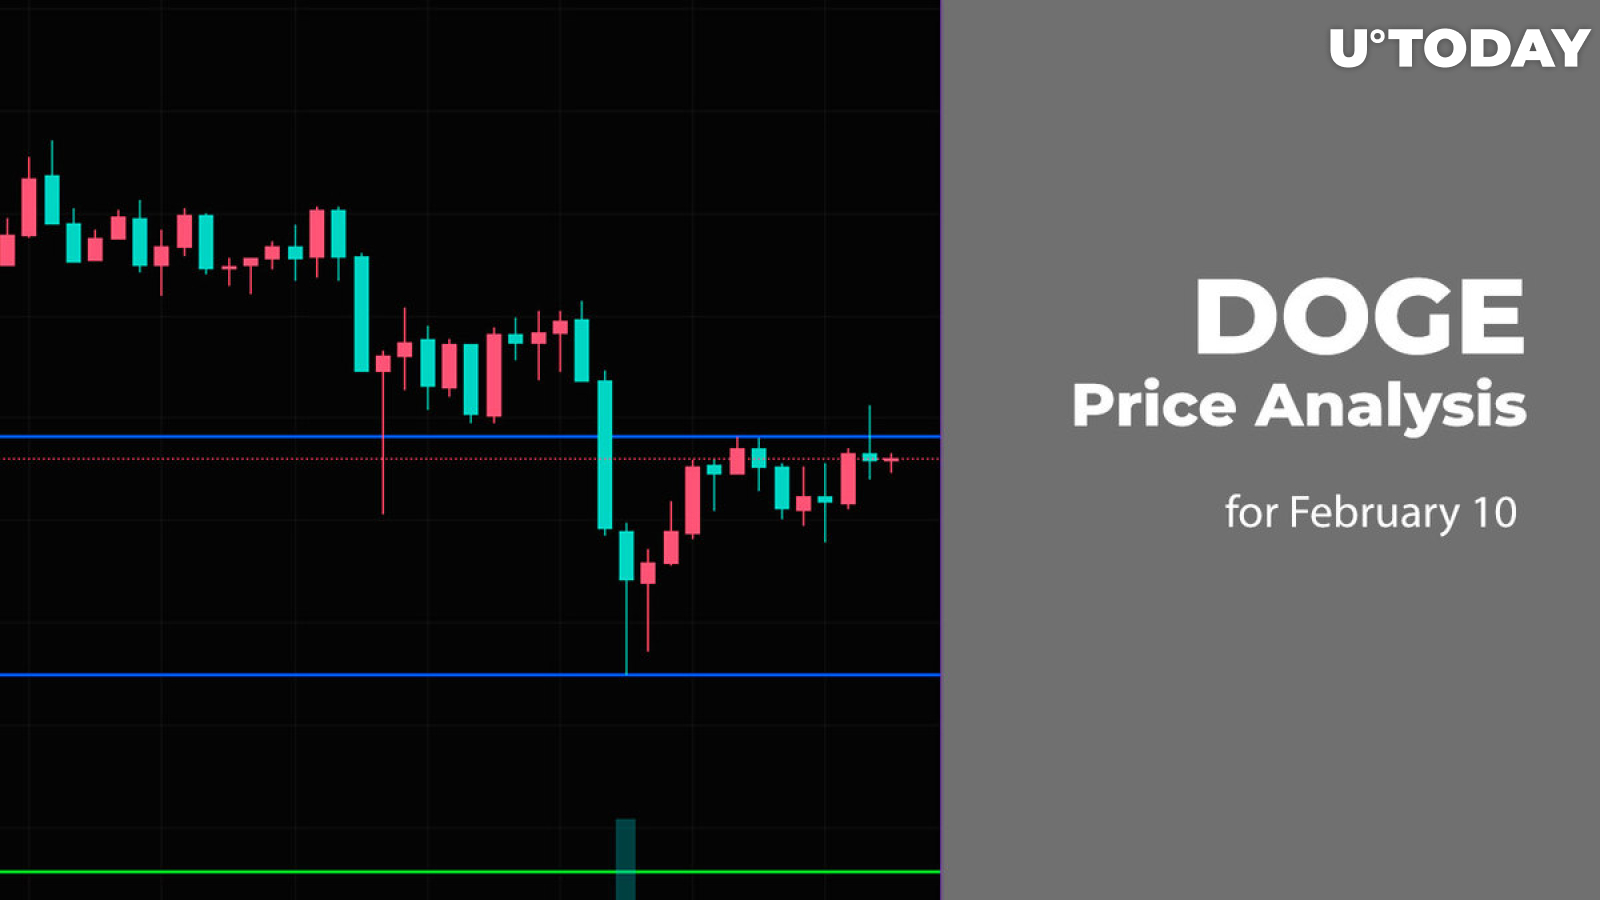 DOGE Price Analysis for February 10